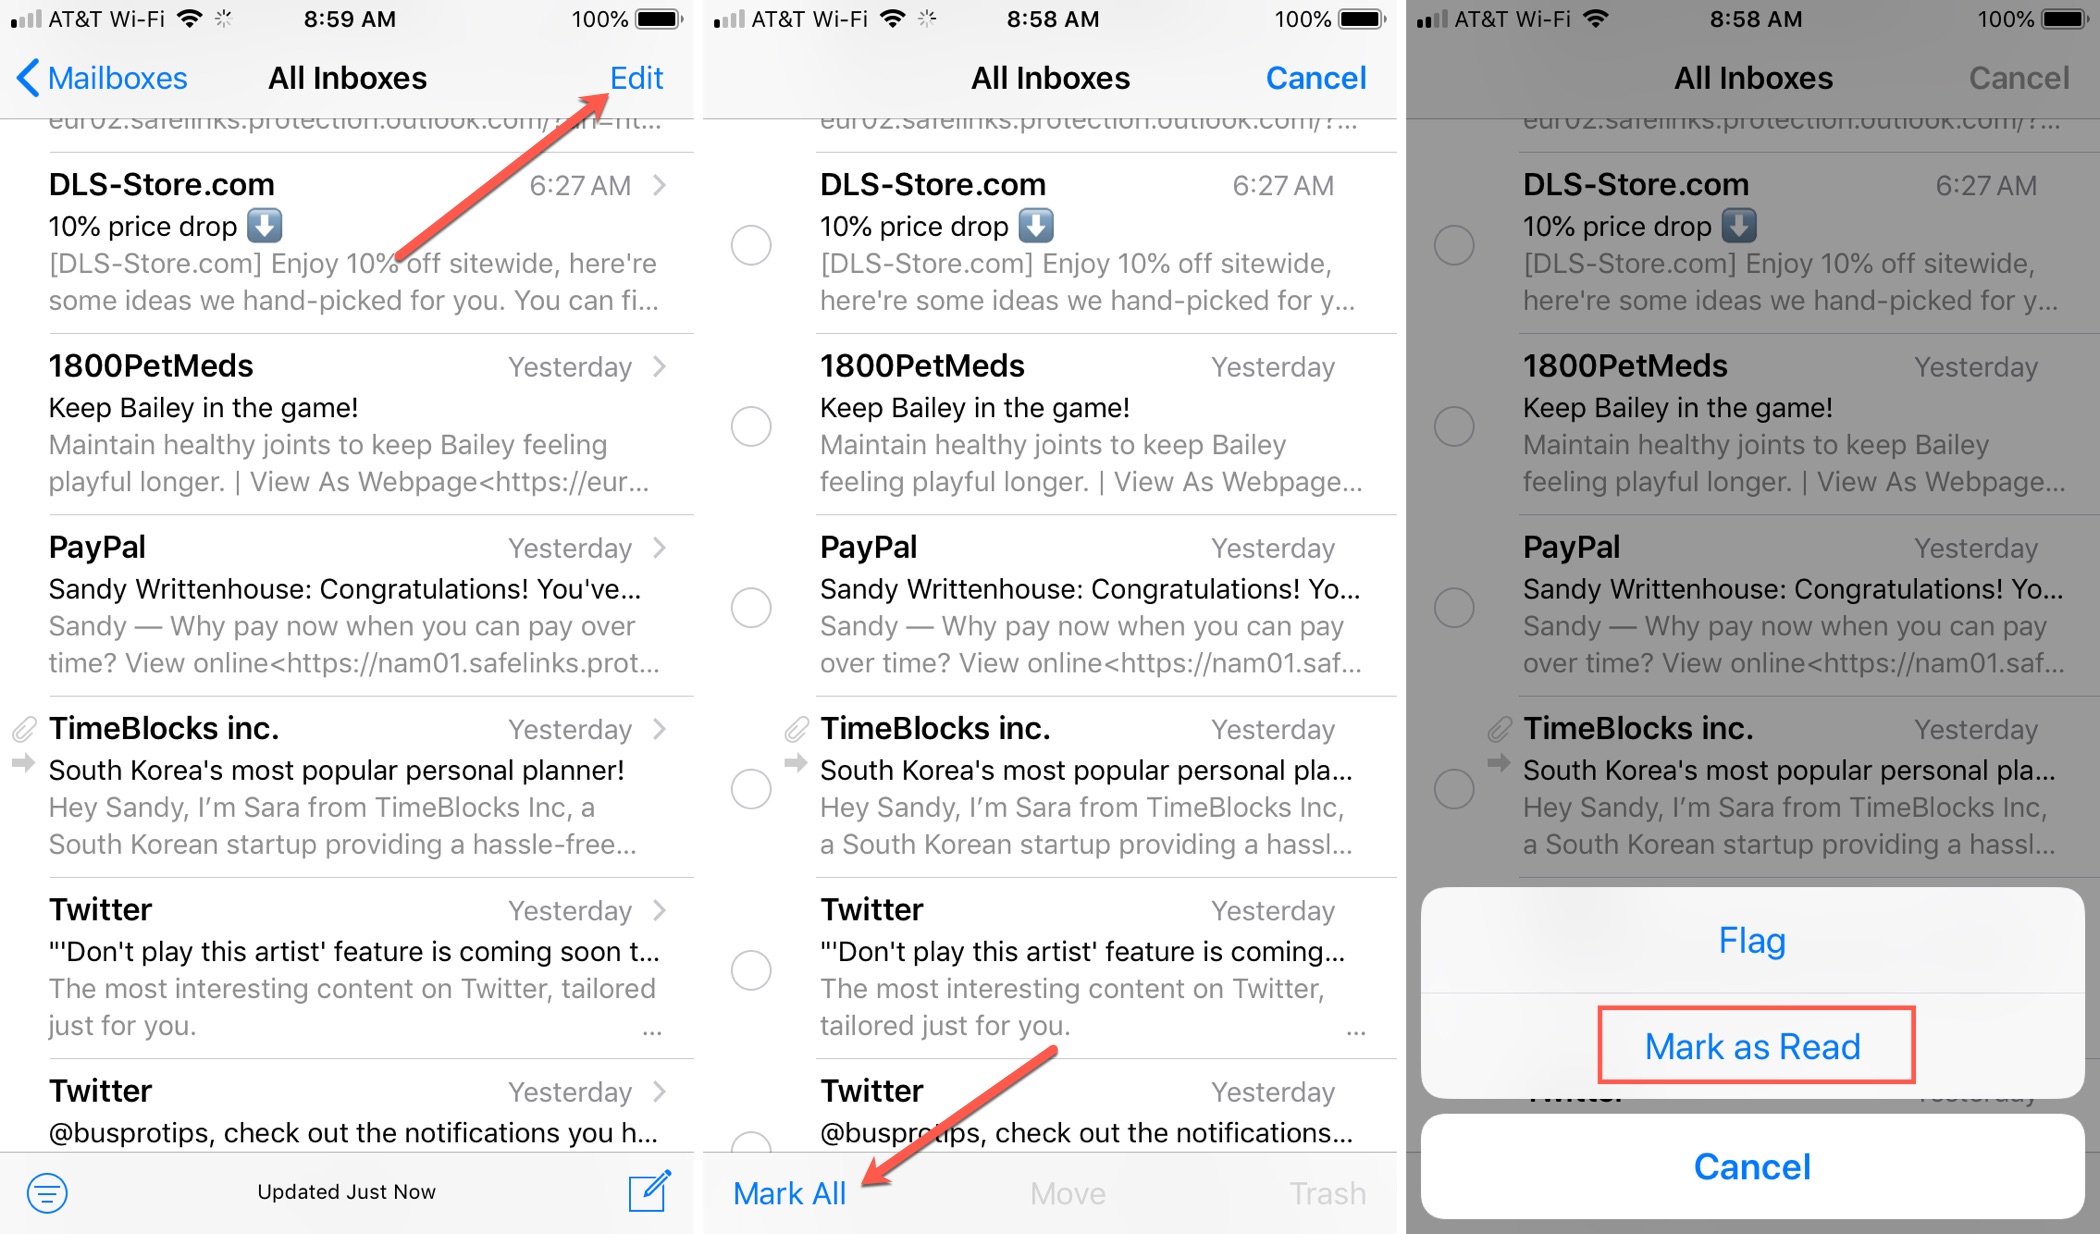 How to mark all your emails as Read on iPhone, iPad and Mac